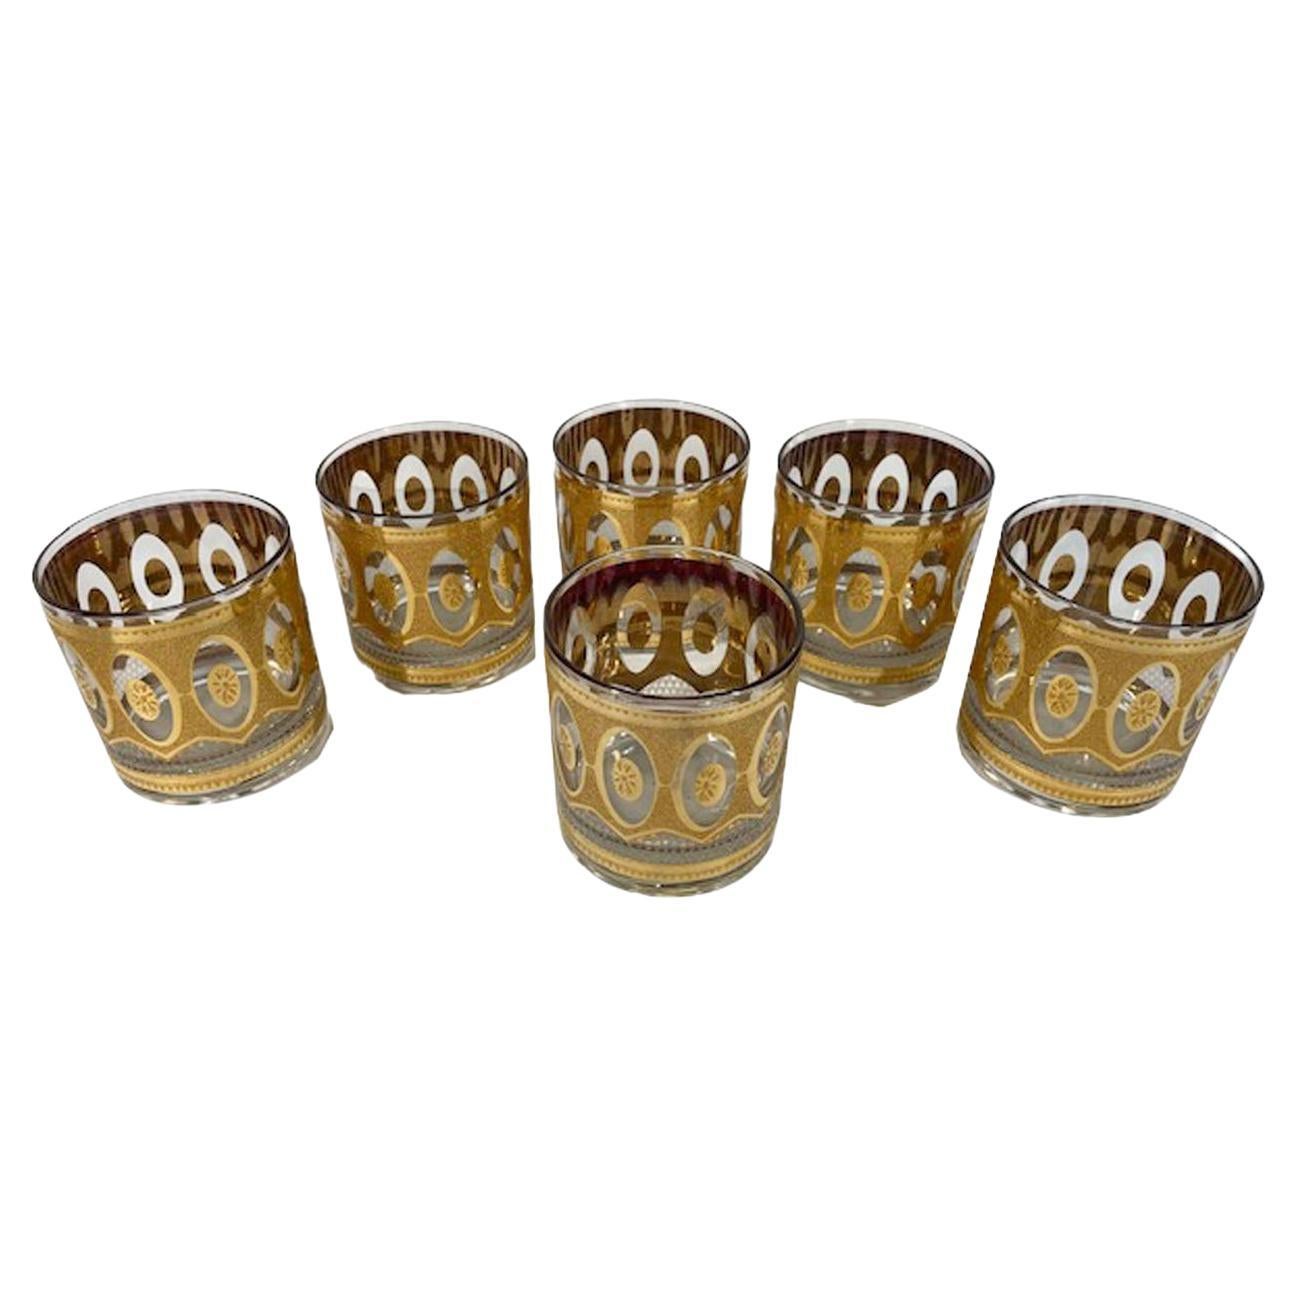 Set of 6 Mid-Century Modern Rocks Glasses by Culver in the Recency Pattern